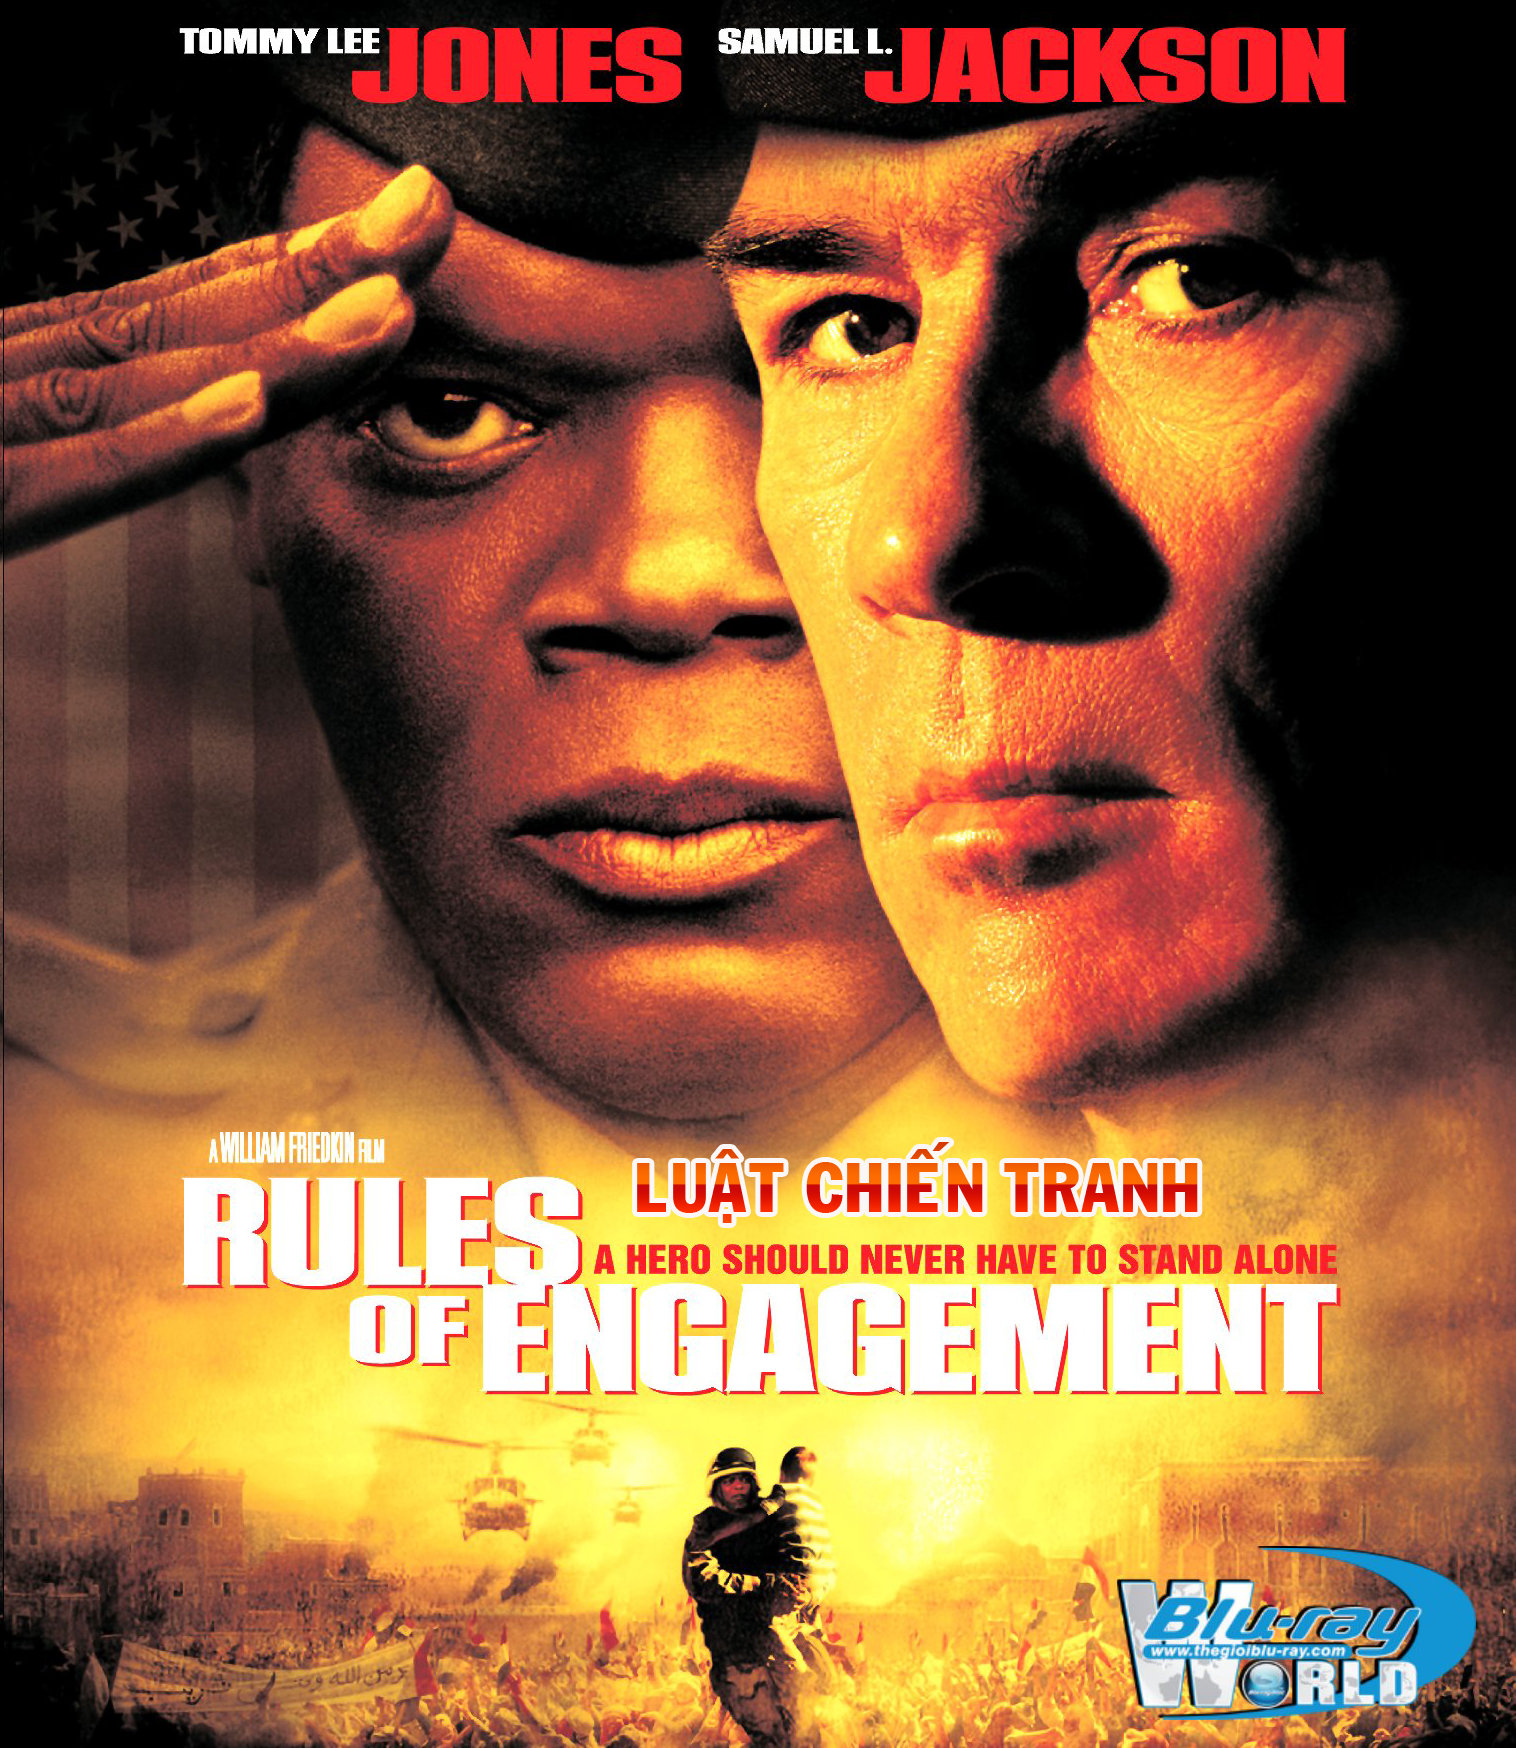 B1719. Rules Of Engagement - LUẬT CHIẾN TRANH 2D 25G (DTS-HD MA 5.1)